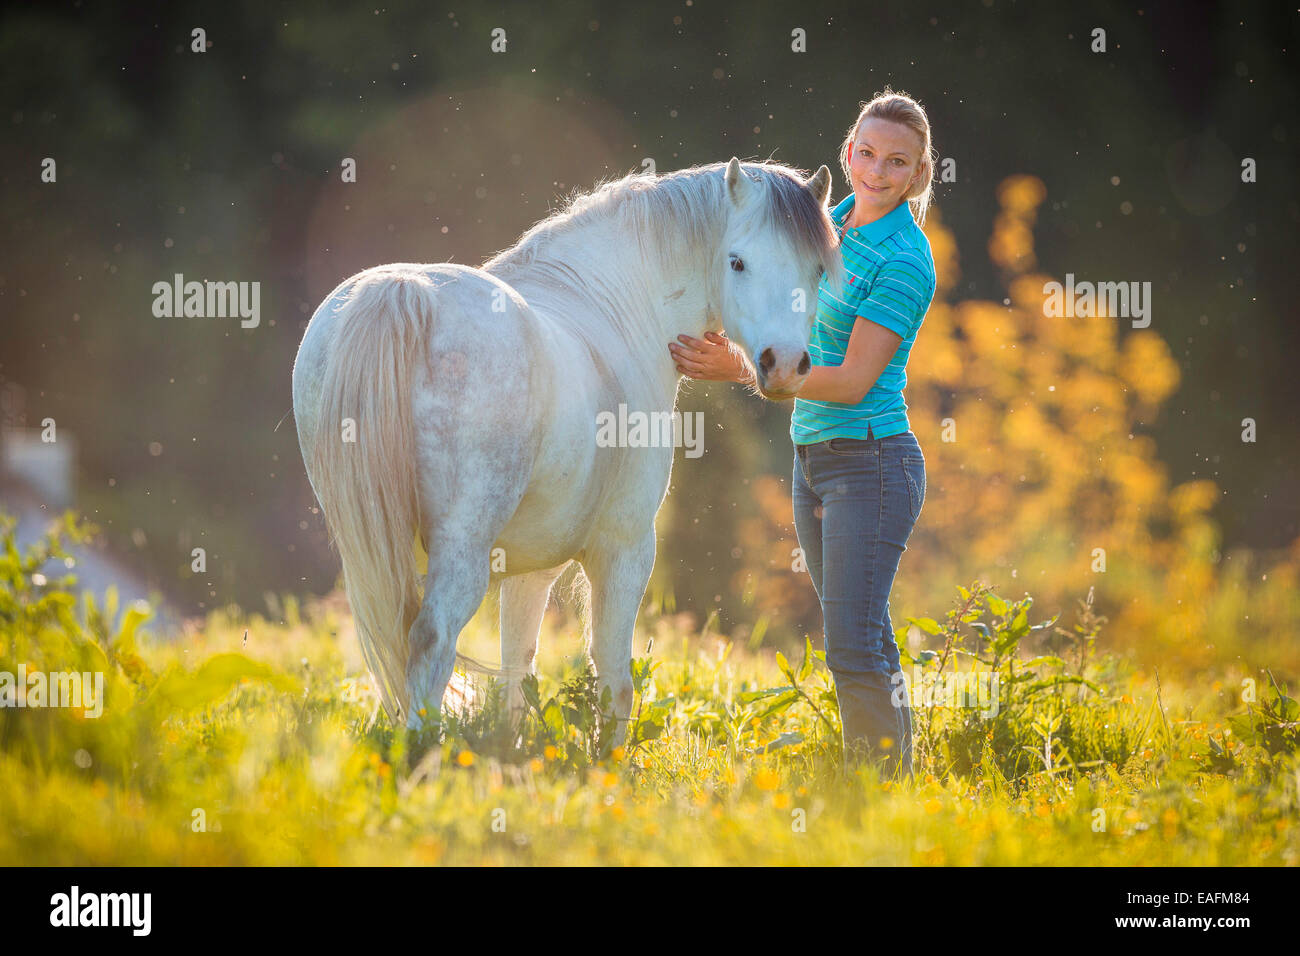 Welsh Mountain Pony Section A Gray gelding standing next to young woman pasture Austria Stock Photo